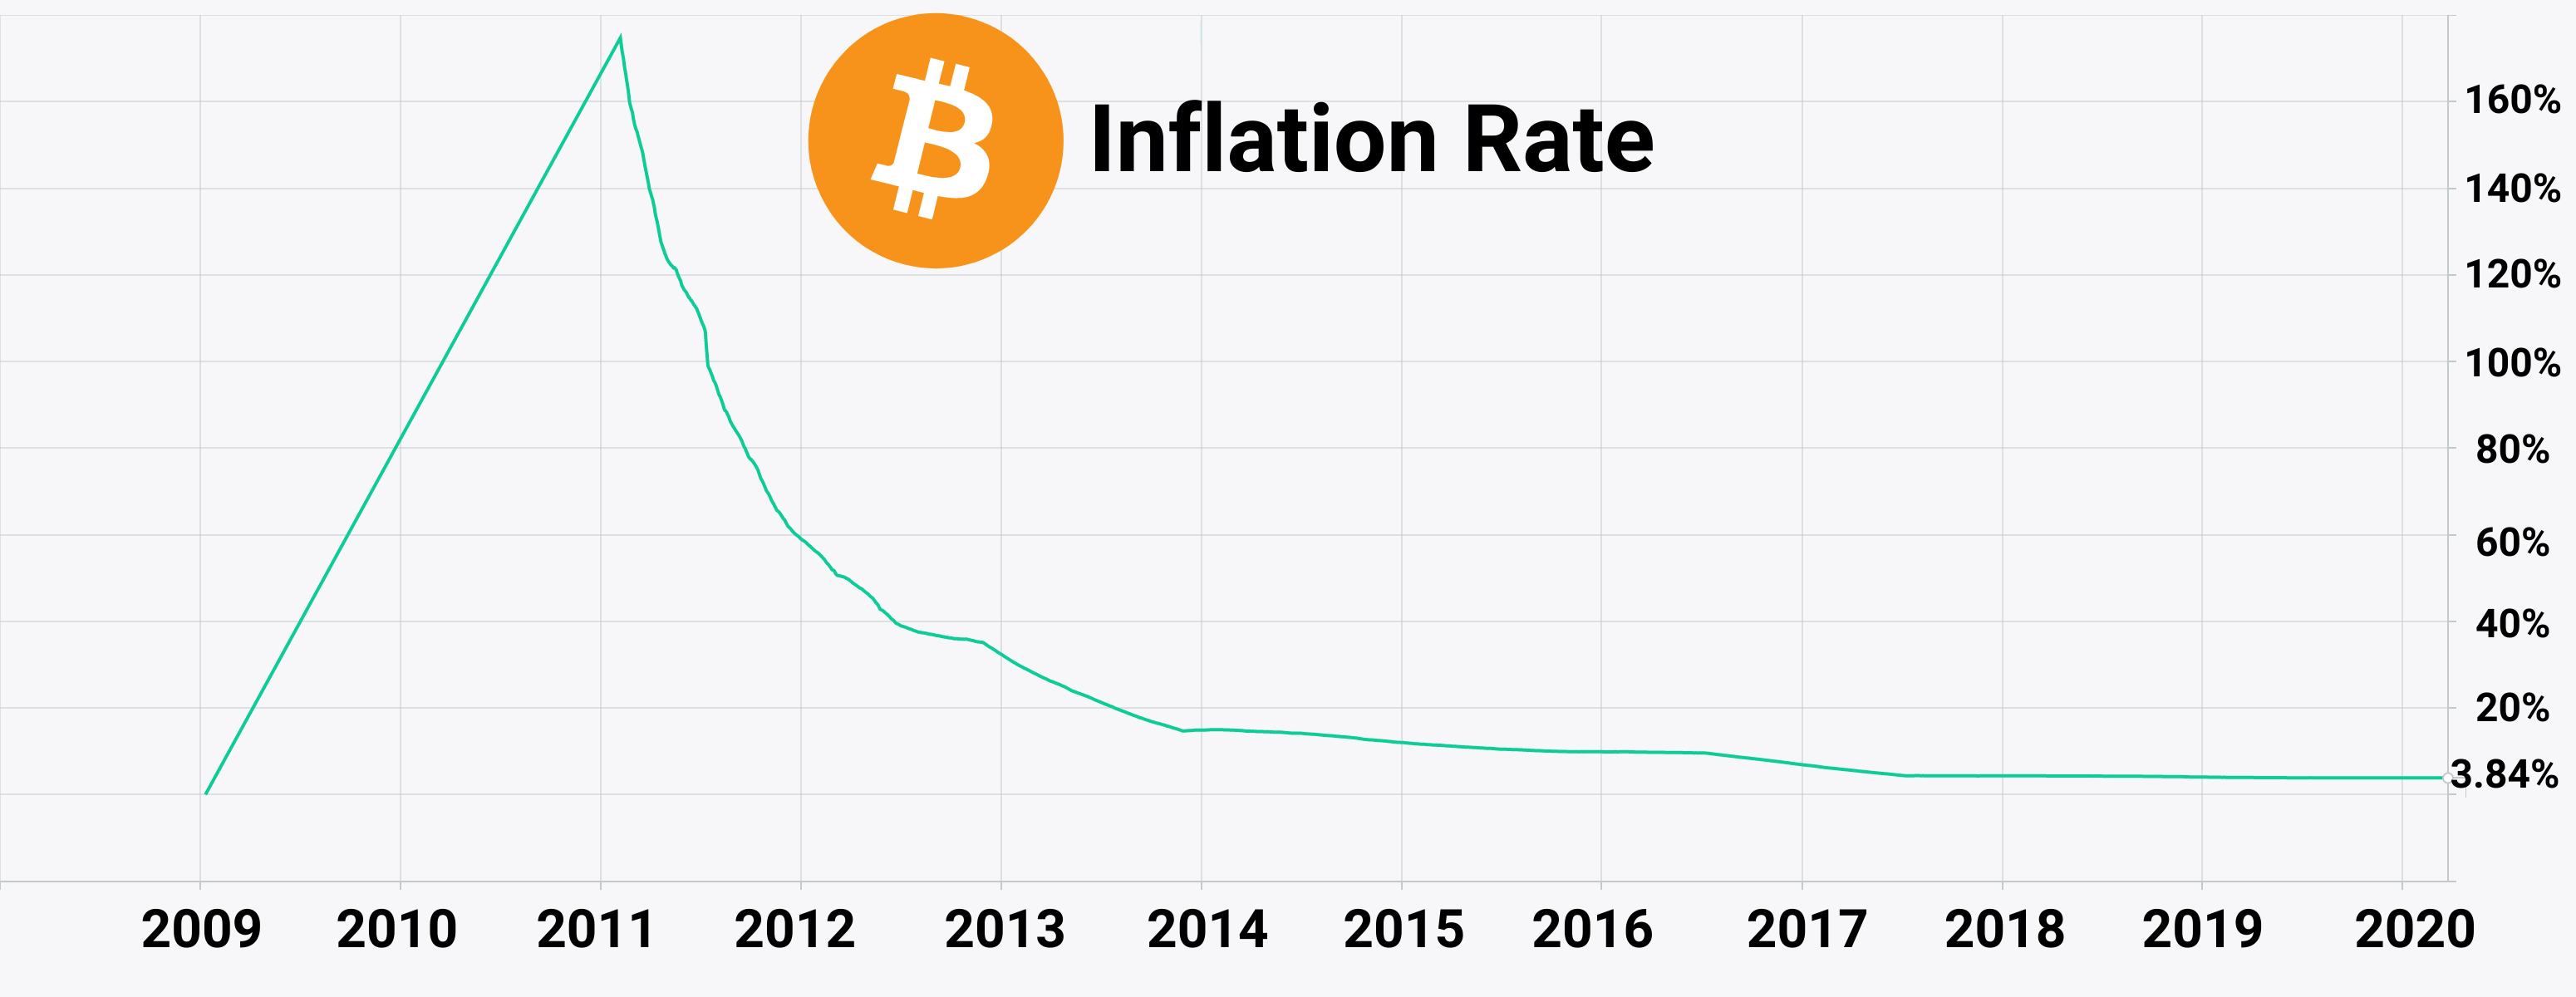 Bitcoin inflation chart from 2009 to 2020 with inflation peaking at 175% in January 2011 and declining ever since to reach 3.83% in 2020.